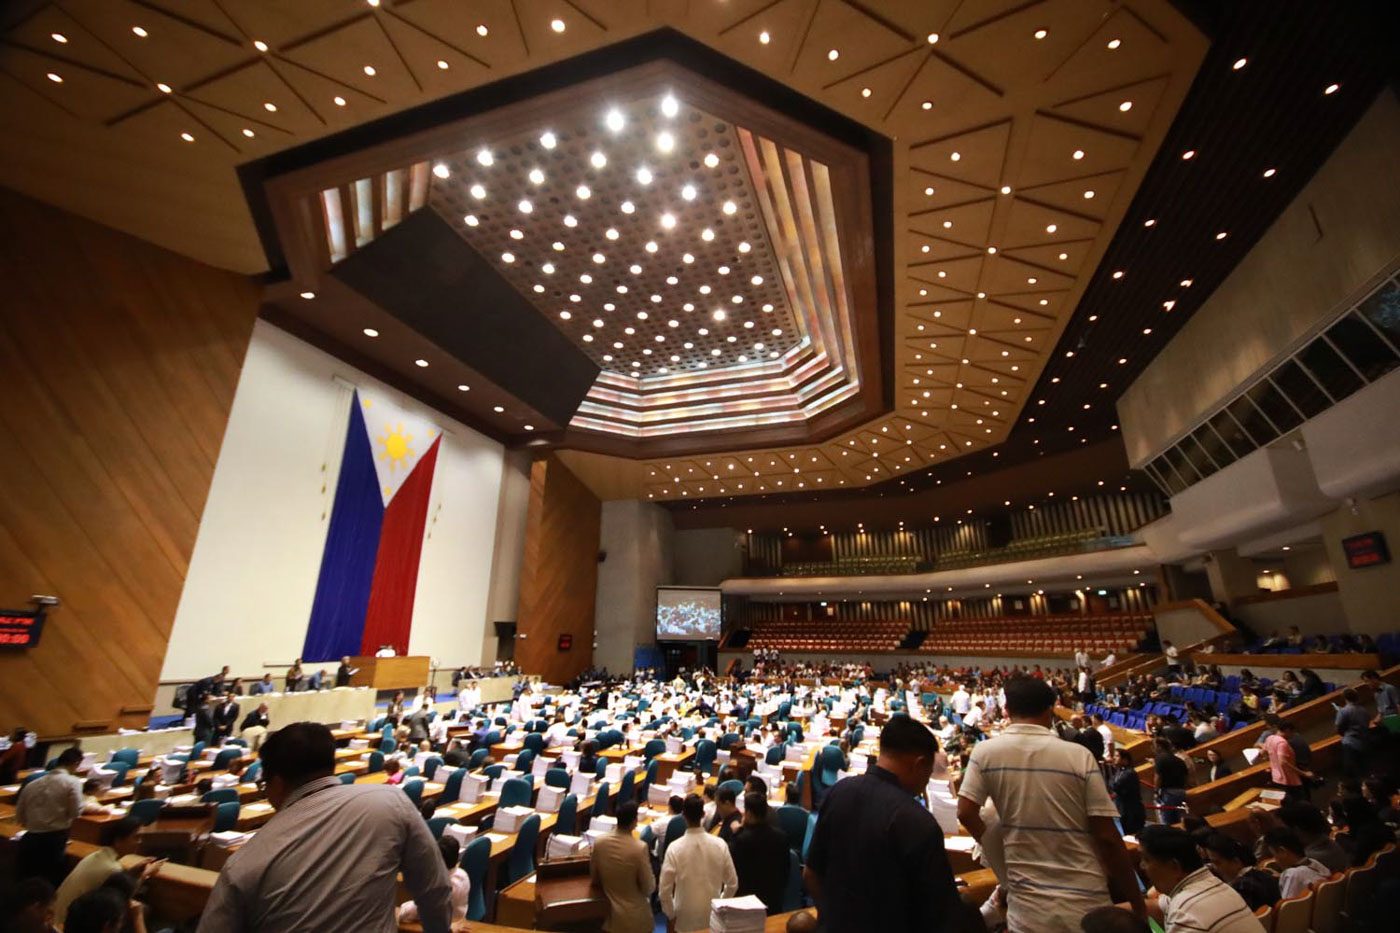 Behind closed doors, lawmakers OK resolution amending Constitution